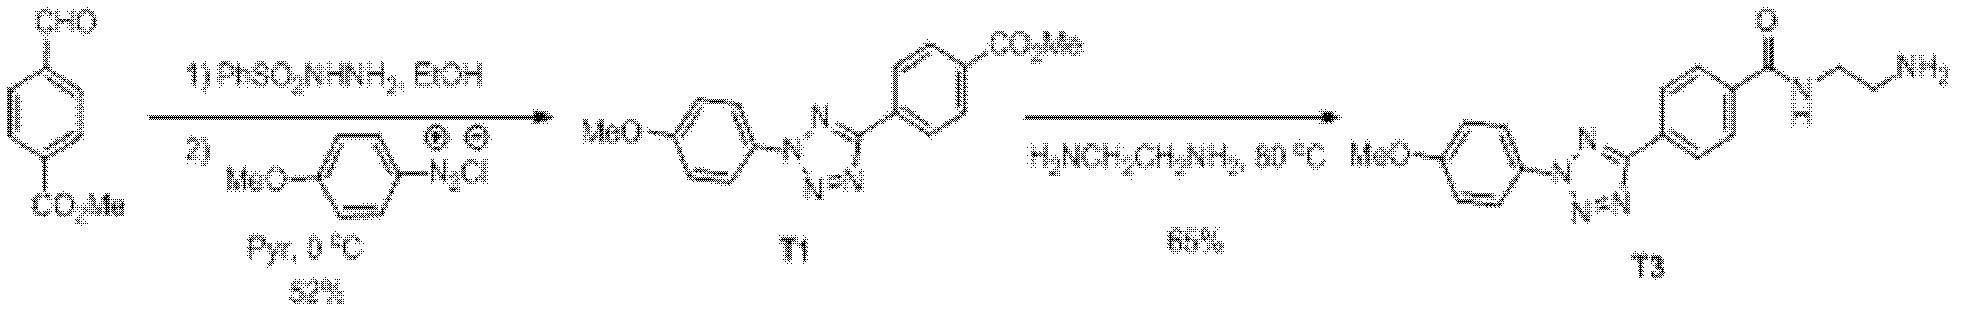 Acrylyl lysine translation system and application thereof